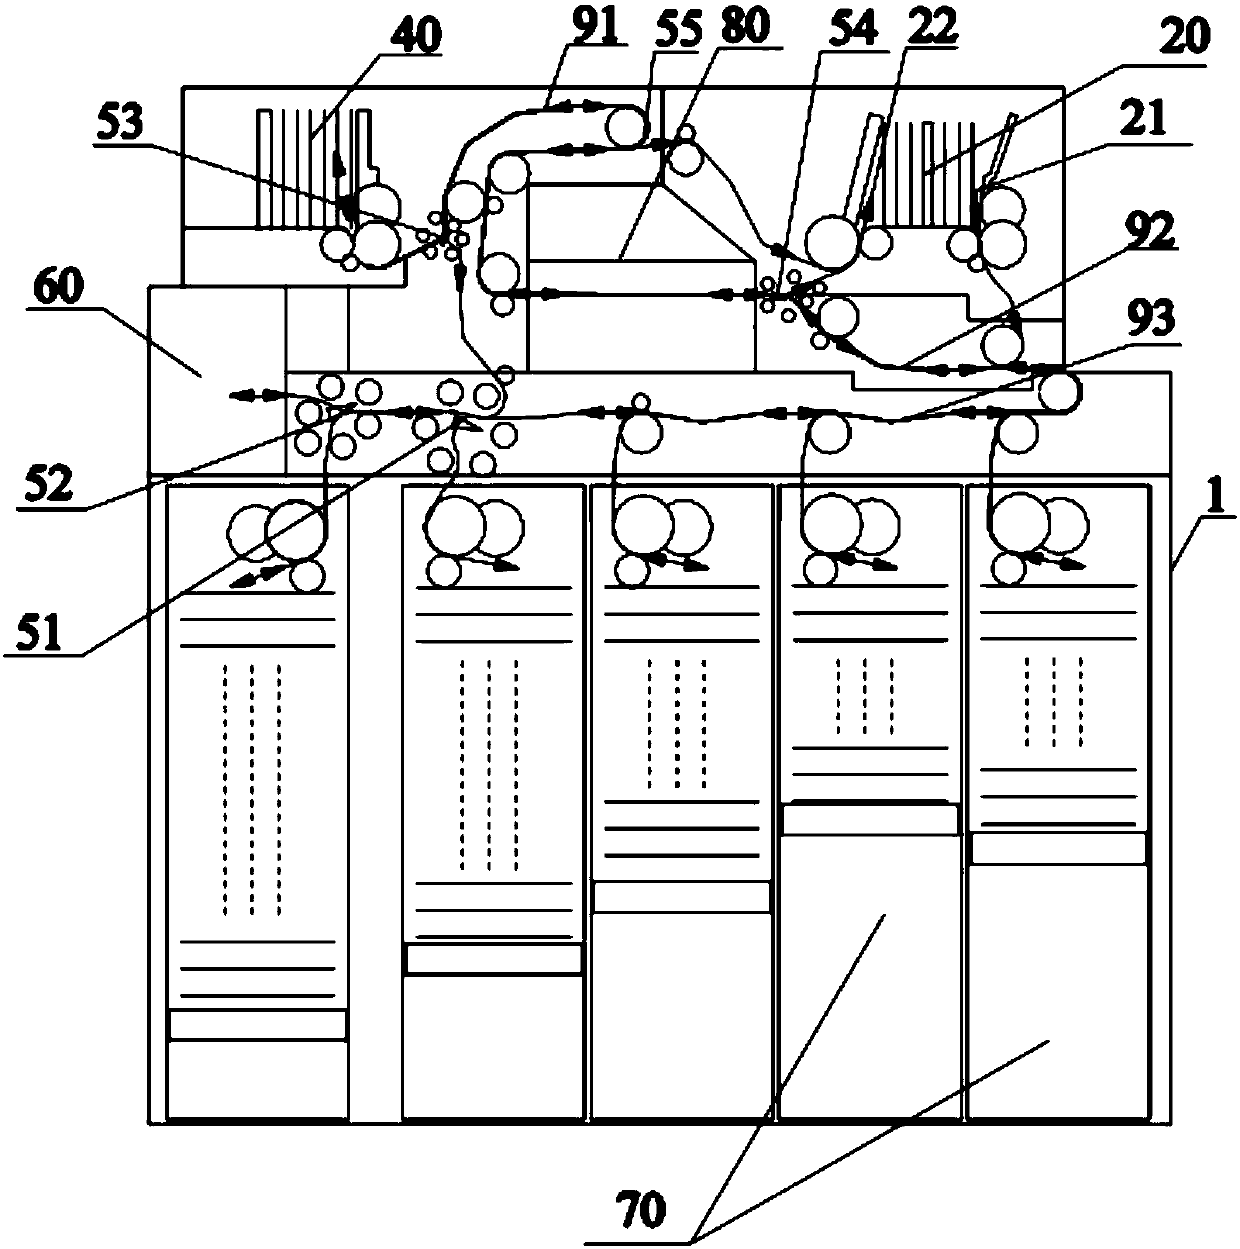 Banknote processing device